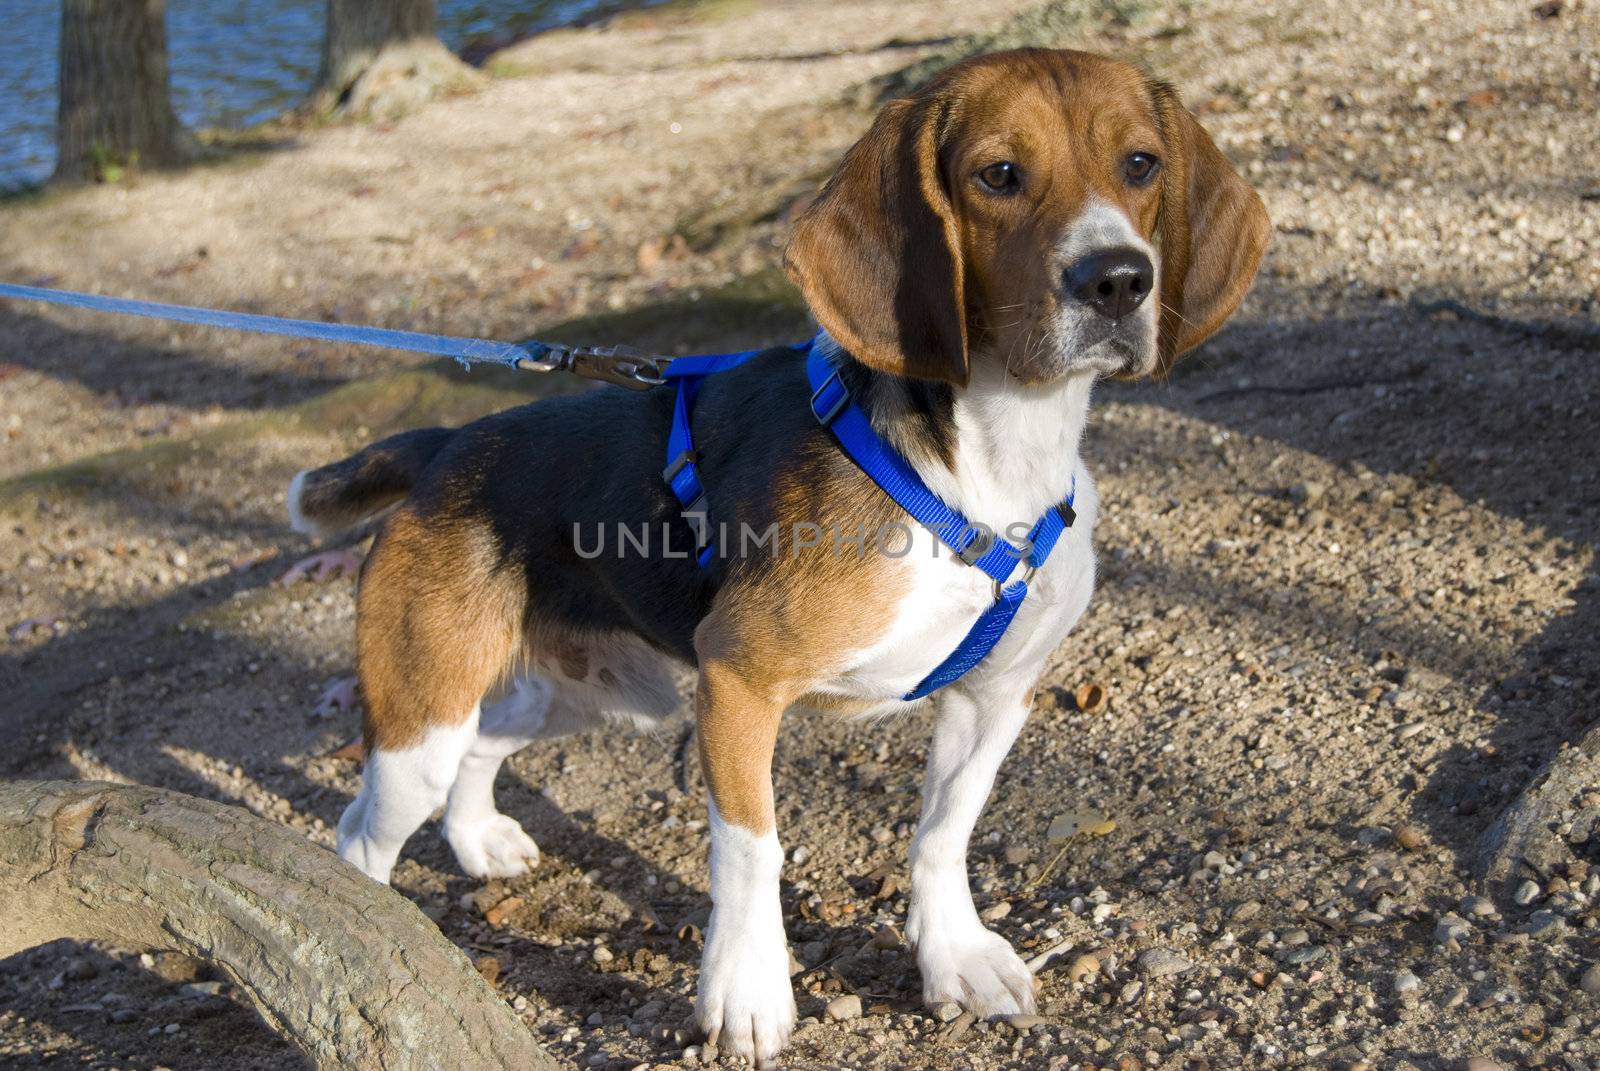 A young, alert beagle gazing ahead on the hunt.